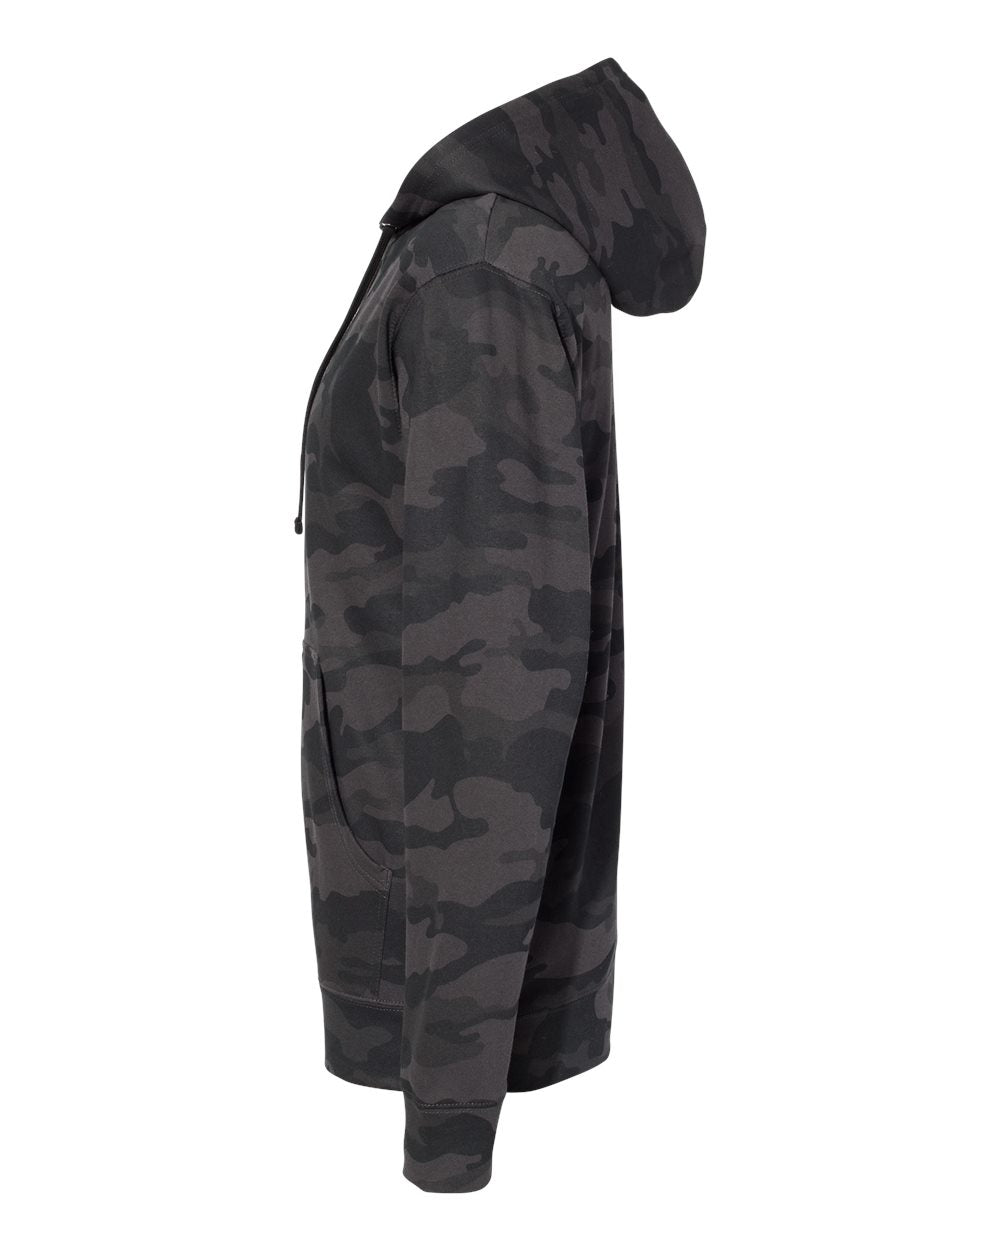 Independent Trading Co. Midweight Hooded Sweatshirt SS4500 #color_Black Camo